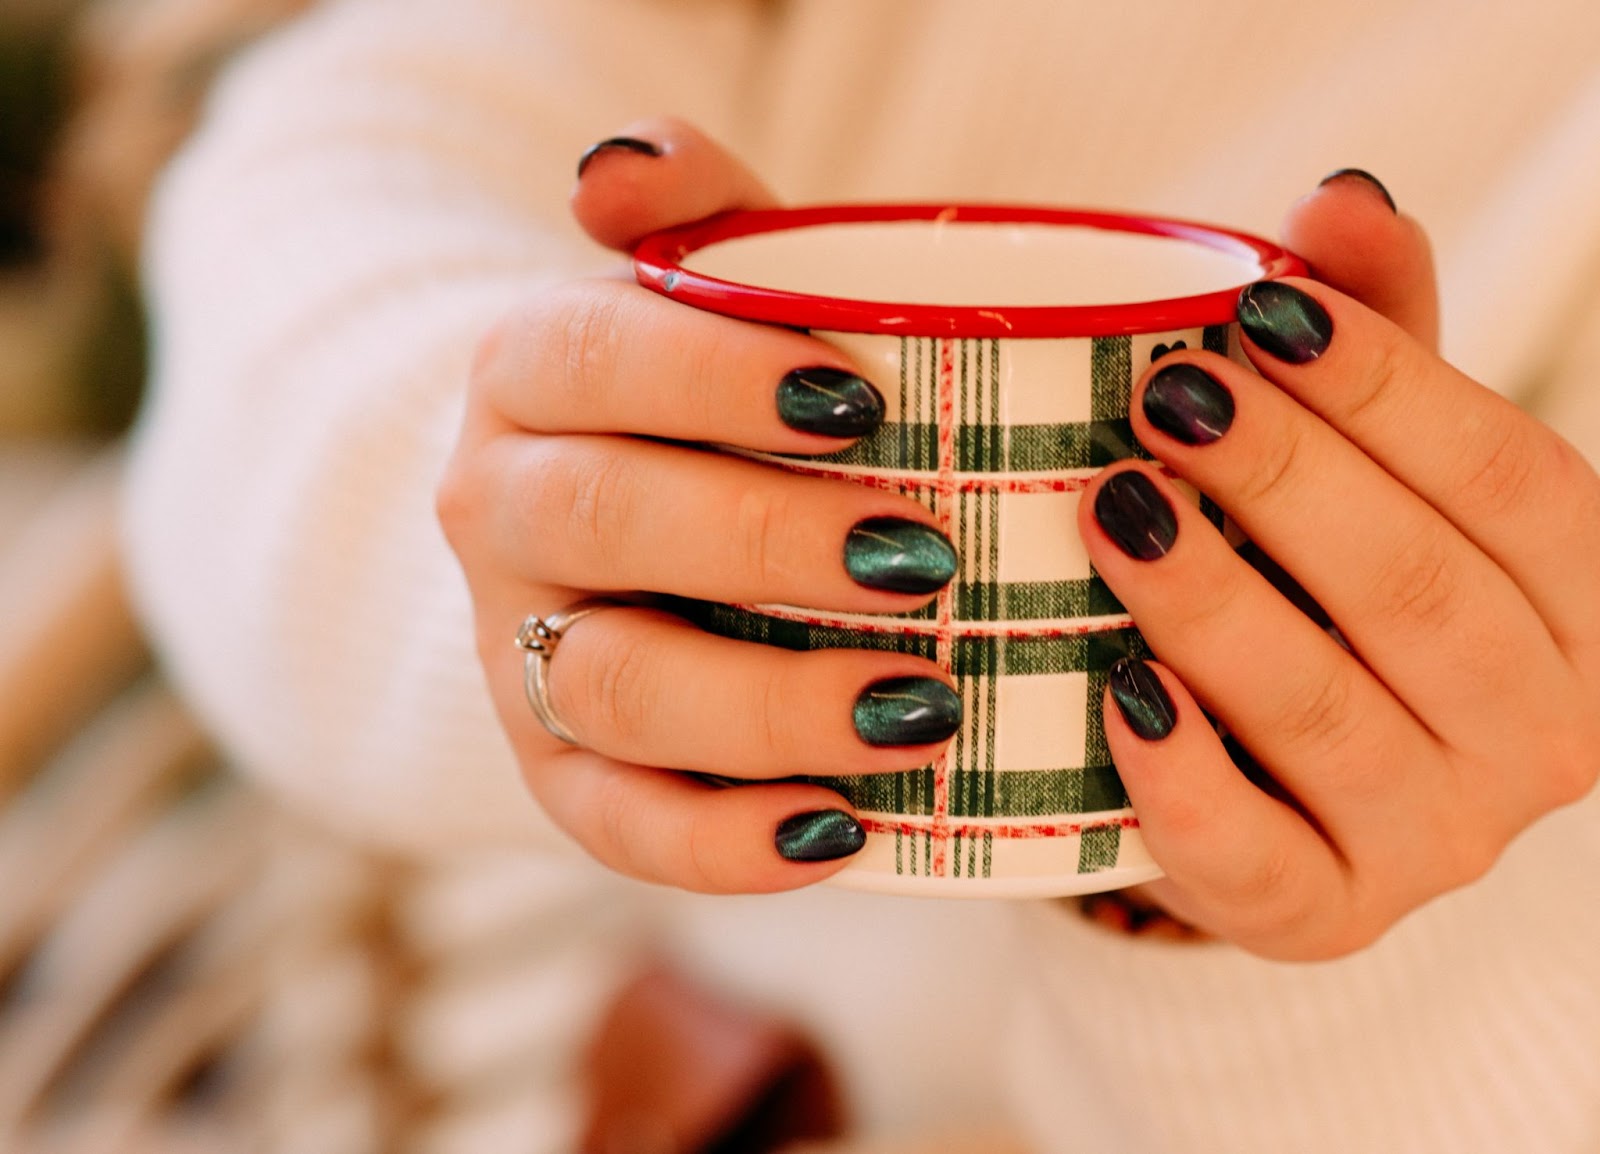 Person holds red and red plaid mug and shows off their green tiger eye nails 